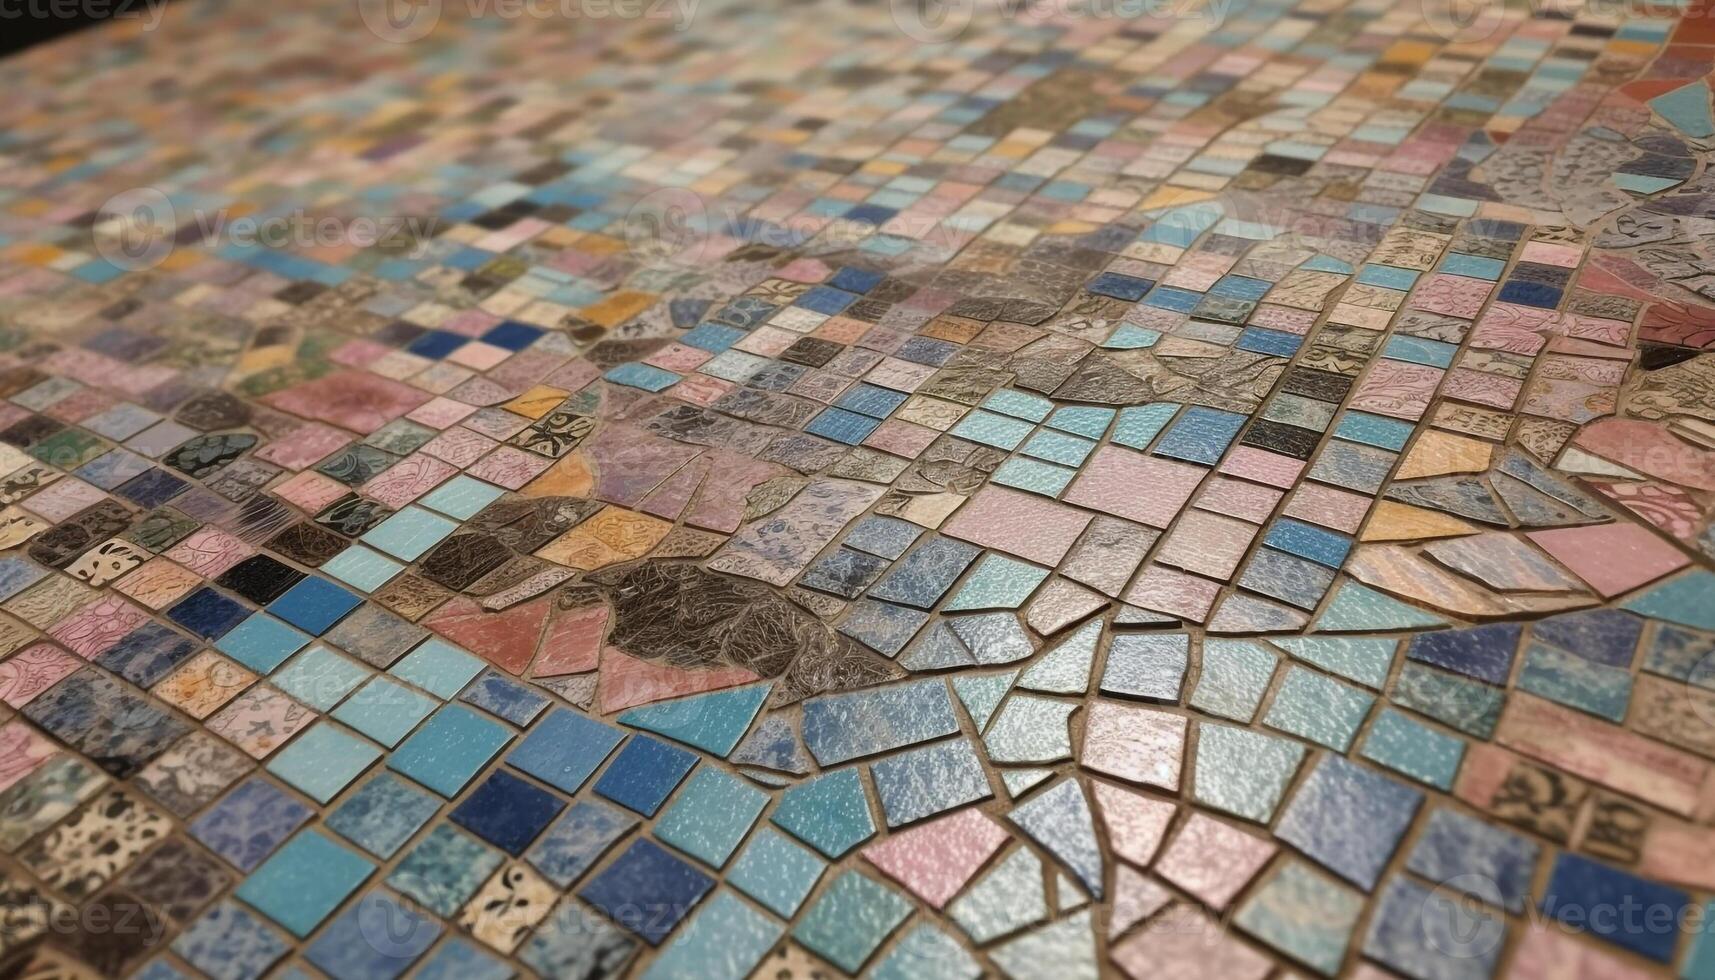 Geometric square tiles create vibrant mosaic flooring in modern architecture generated by AI photo